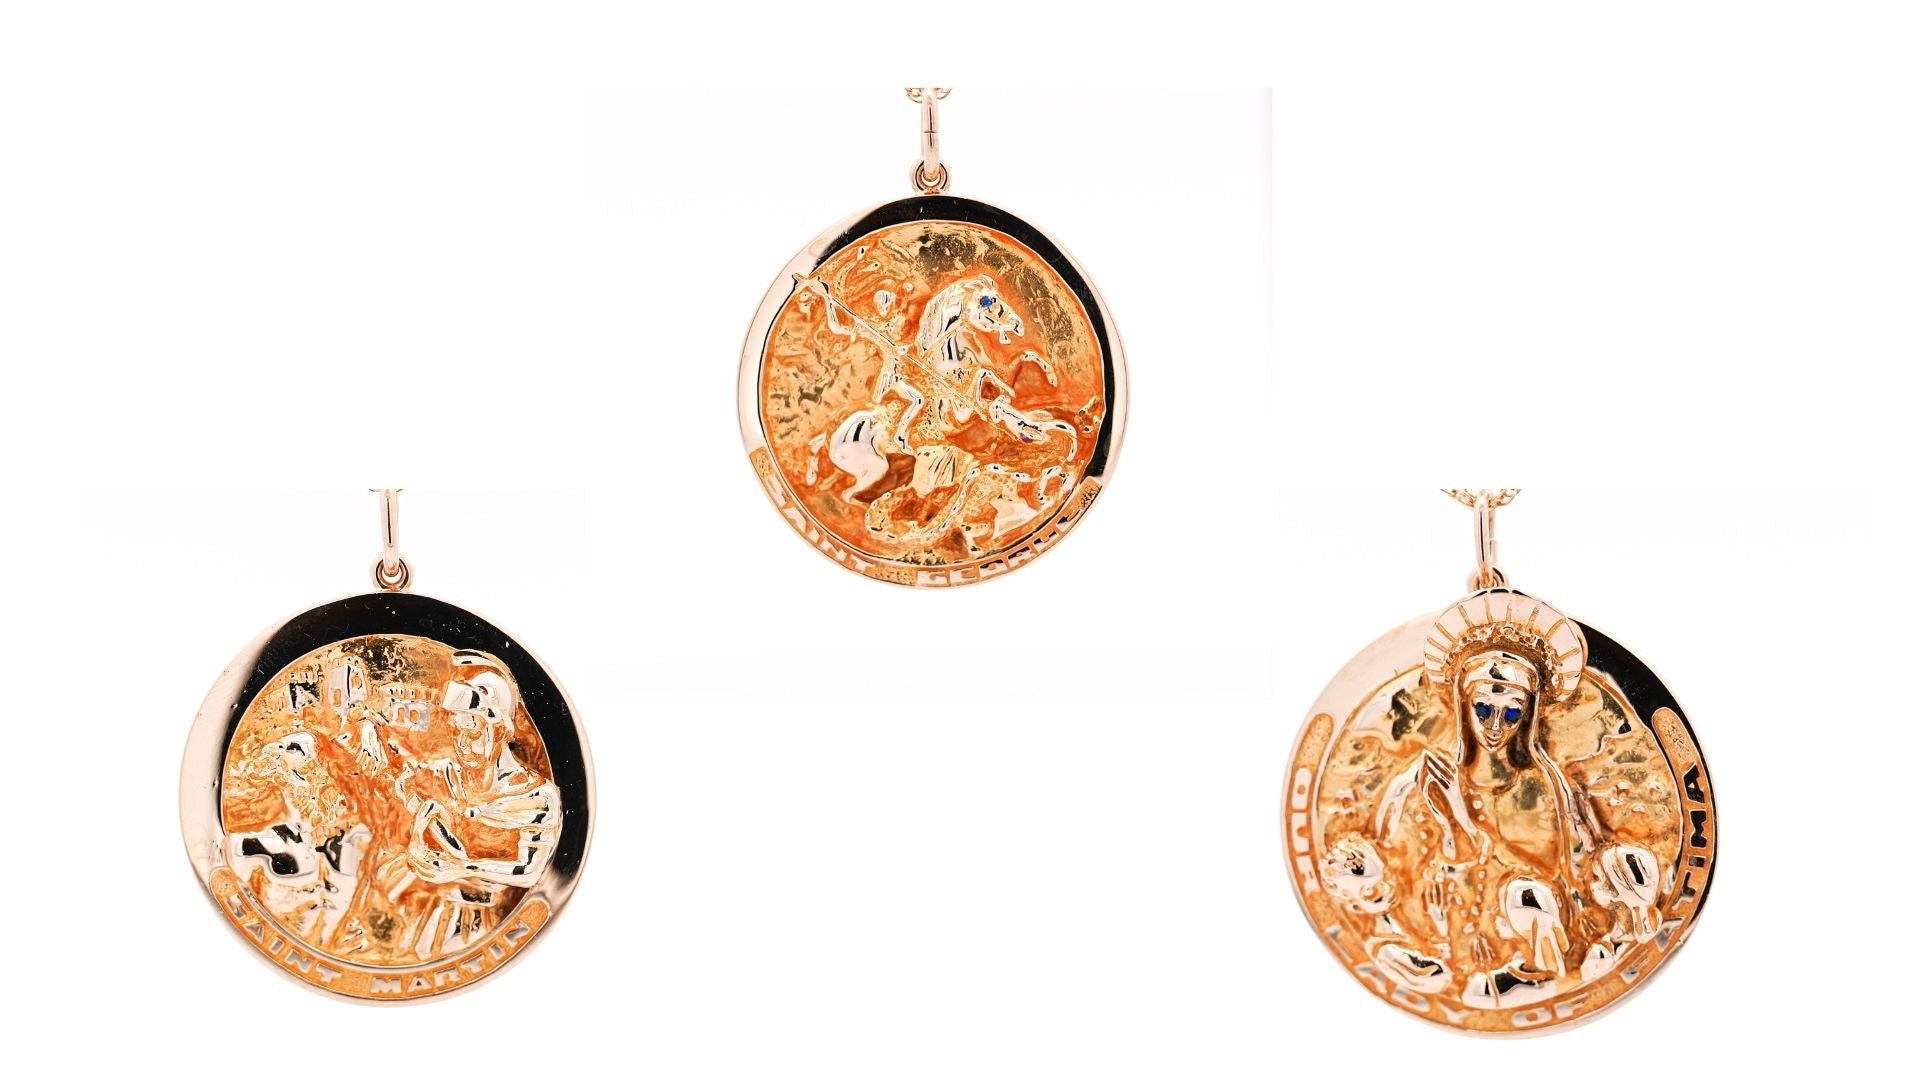 Vintage 14k Solid Gold Carved Medallion Pendant (Set of 3) by William Ruser - Our Lady of Fatima, Saint Martin, Saint George